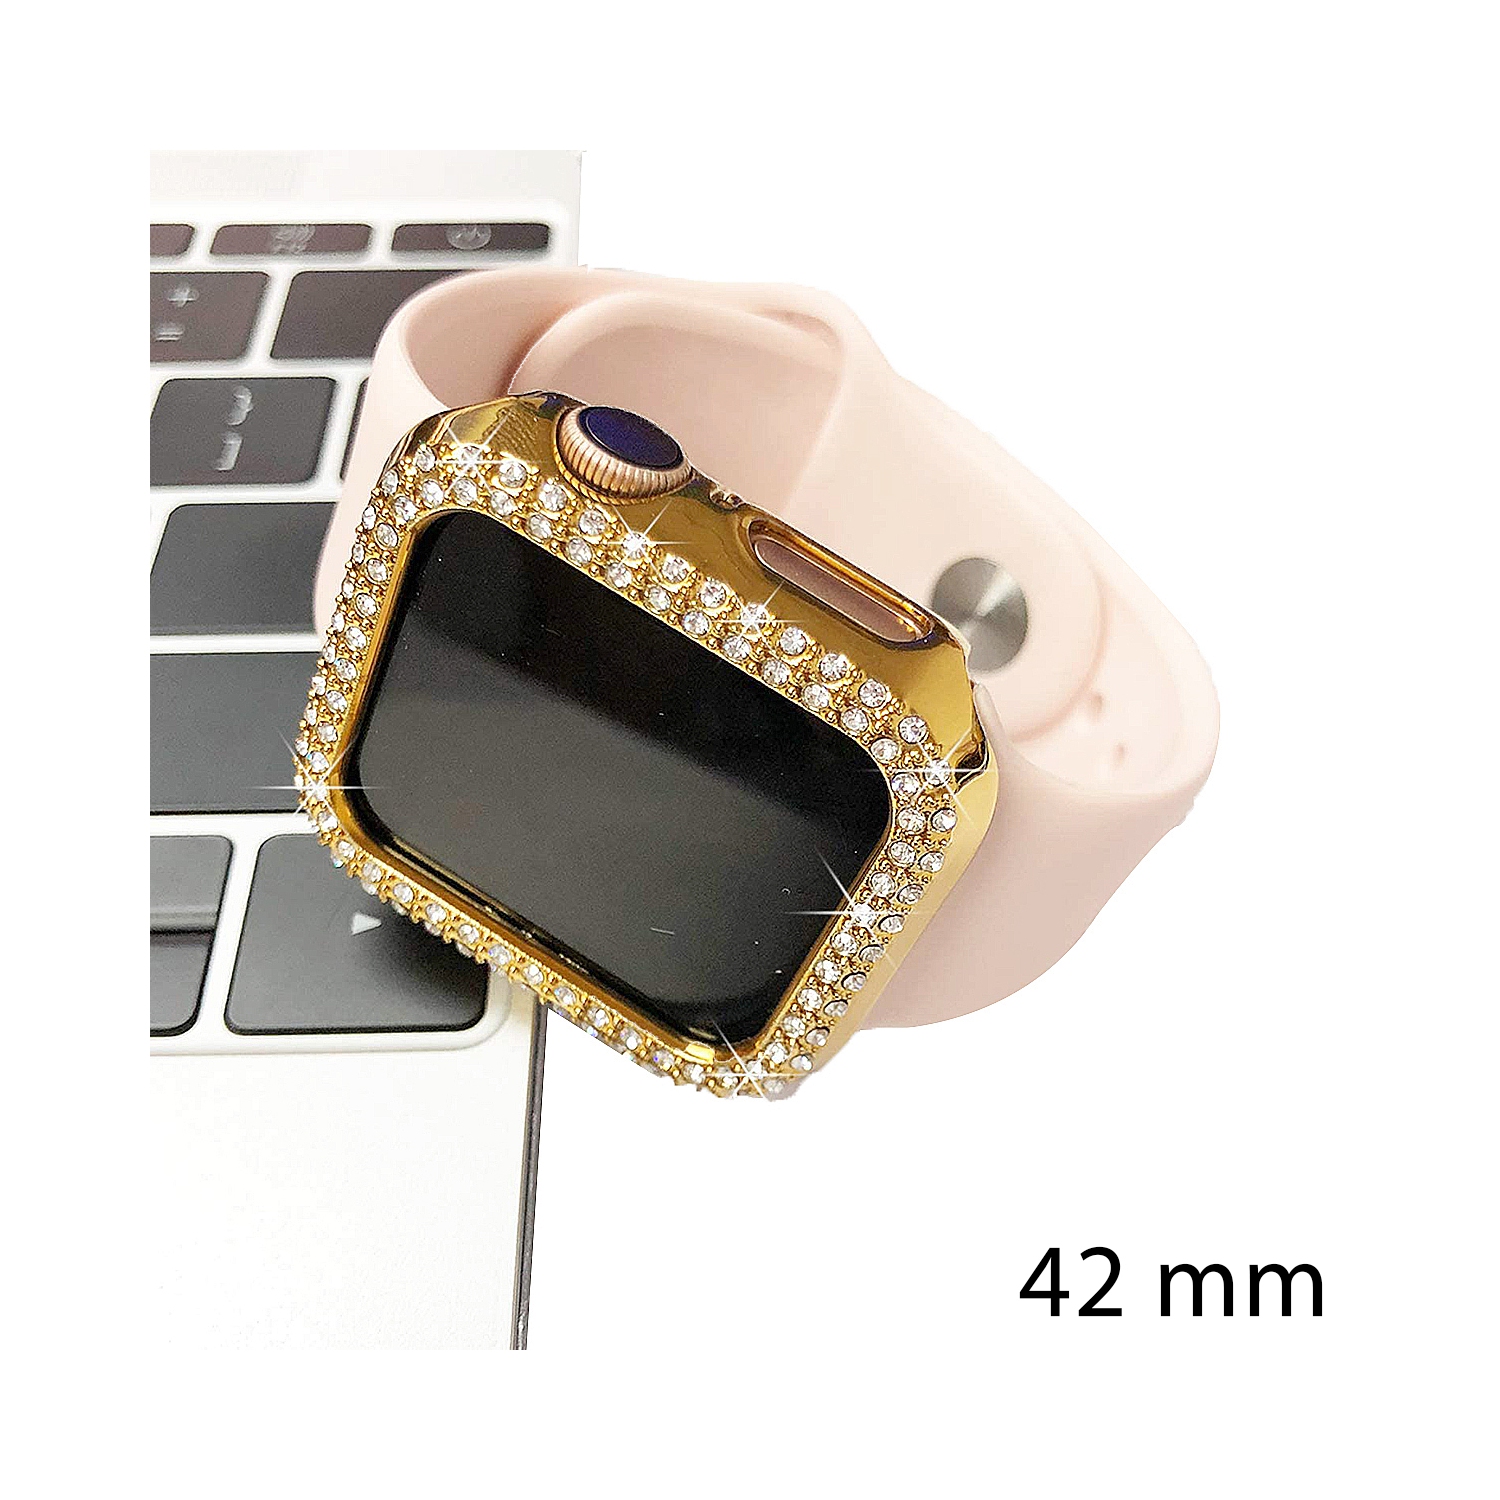 Crystal Diamond Design Bumper Case Body Protection Cover Watch Shell For Apple iWatch 42mm Series 1 / 2 / 3 - Gold